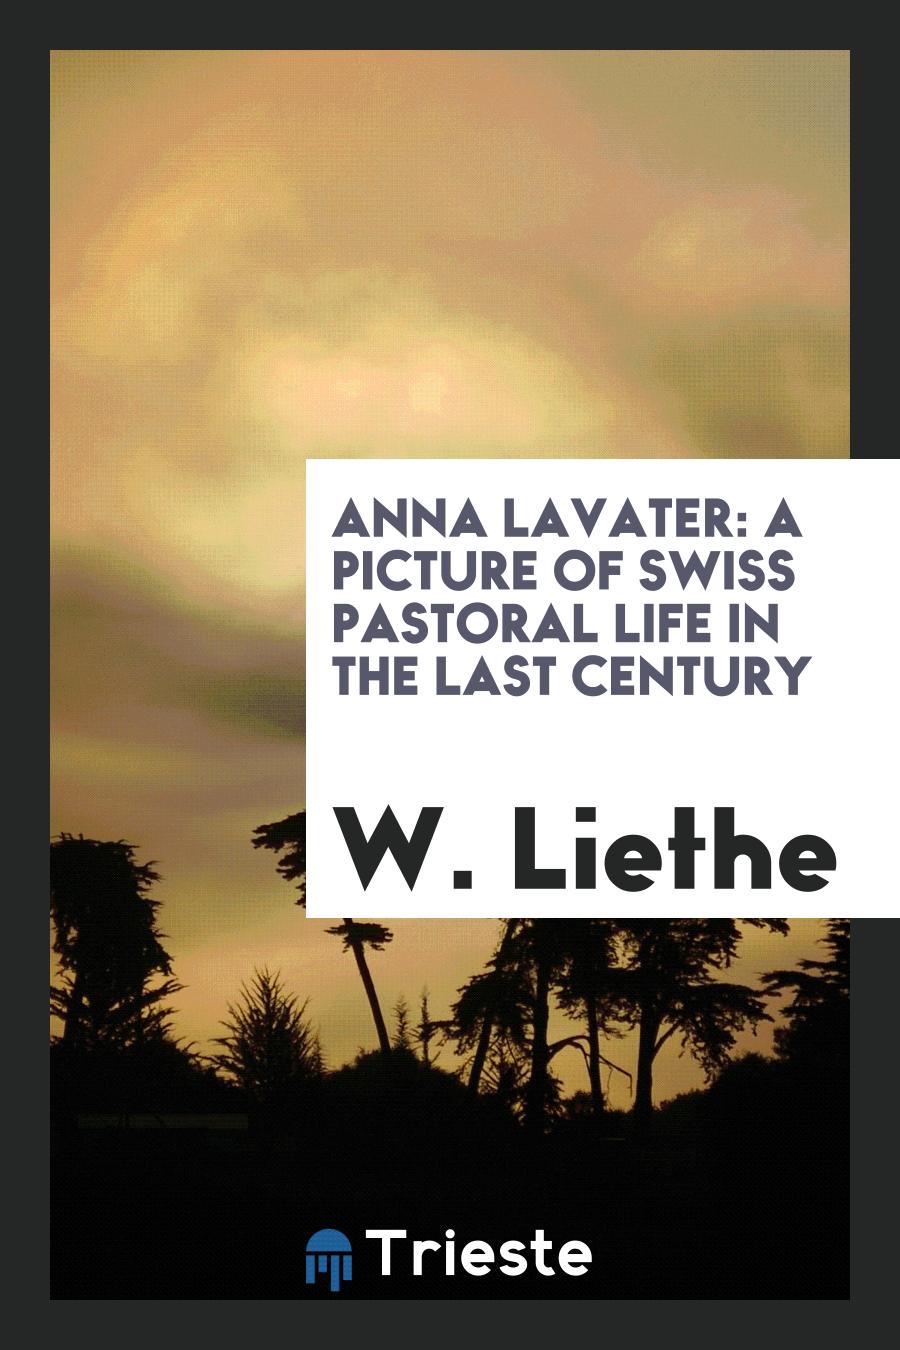 Anna Lavater: A Picture of Swiss Pastoral Life in the Last Century